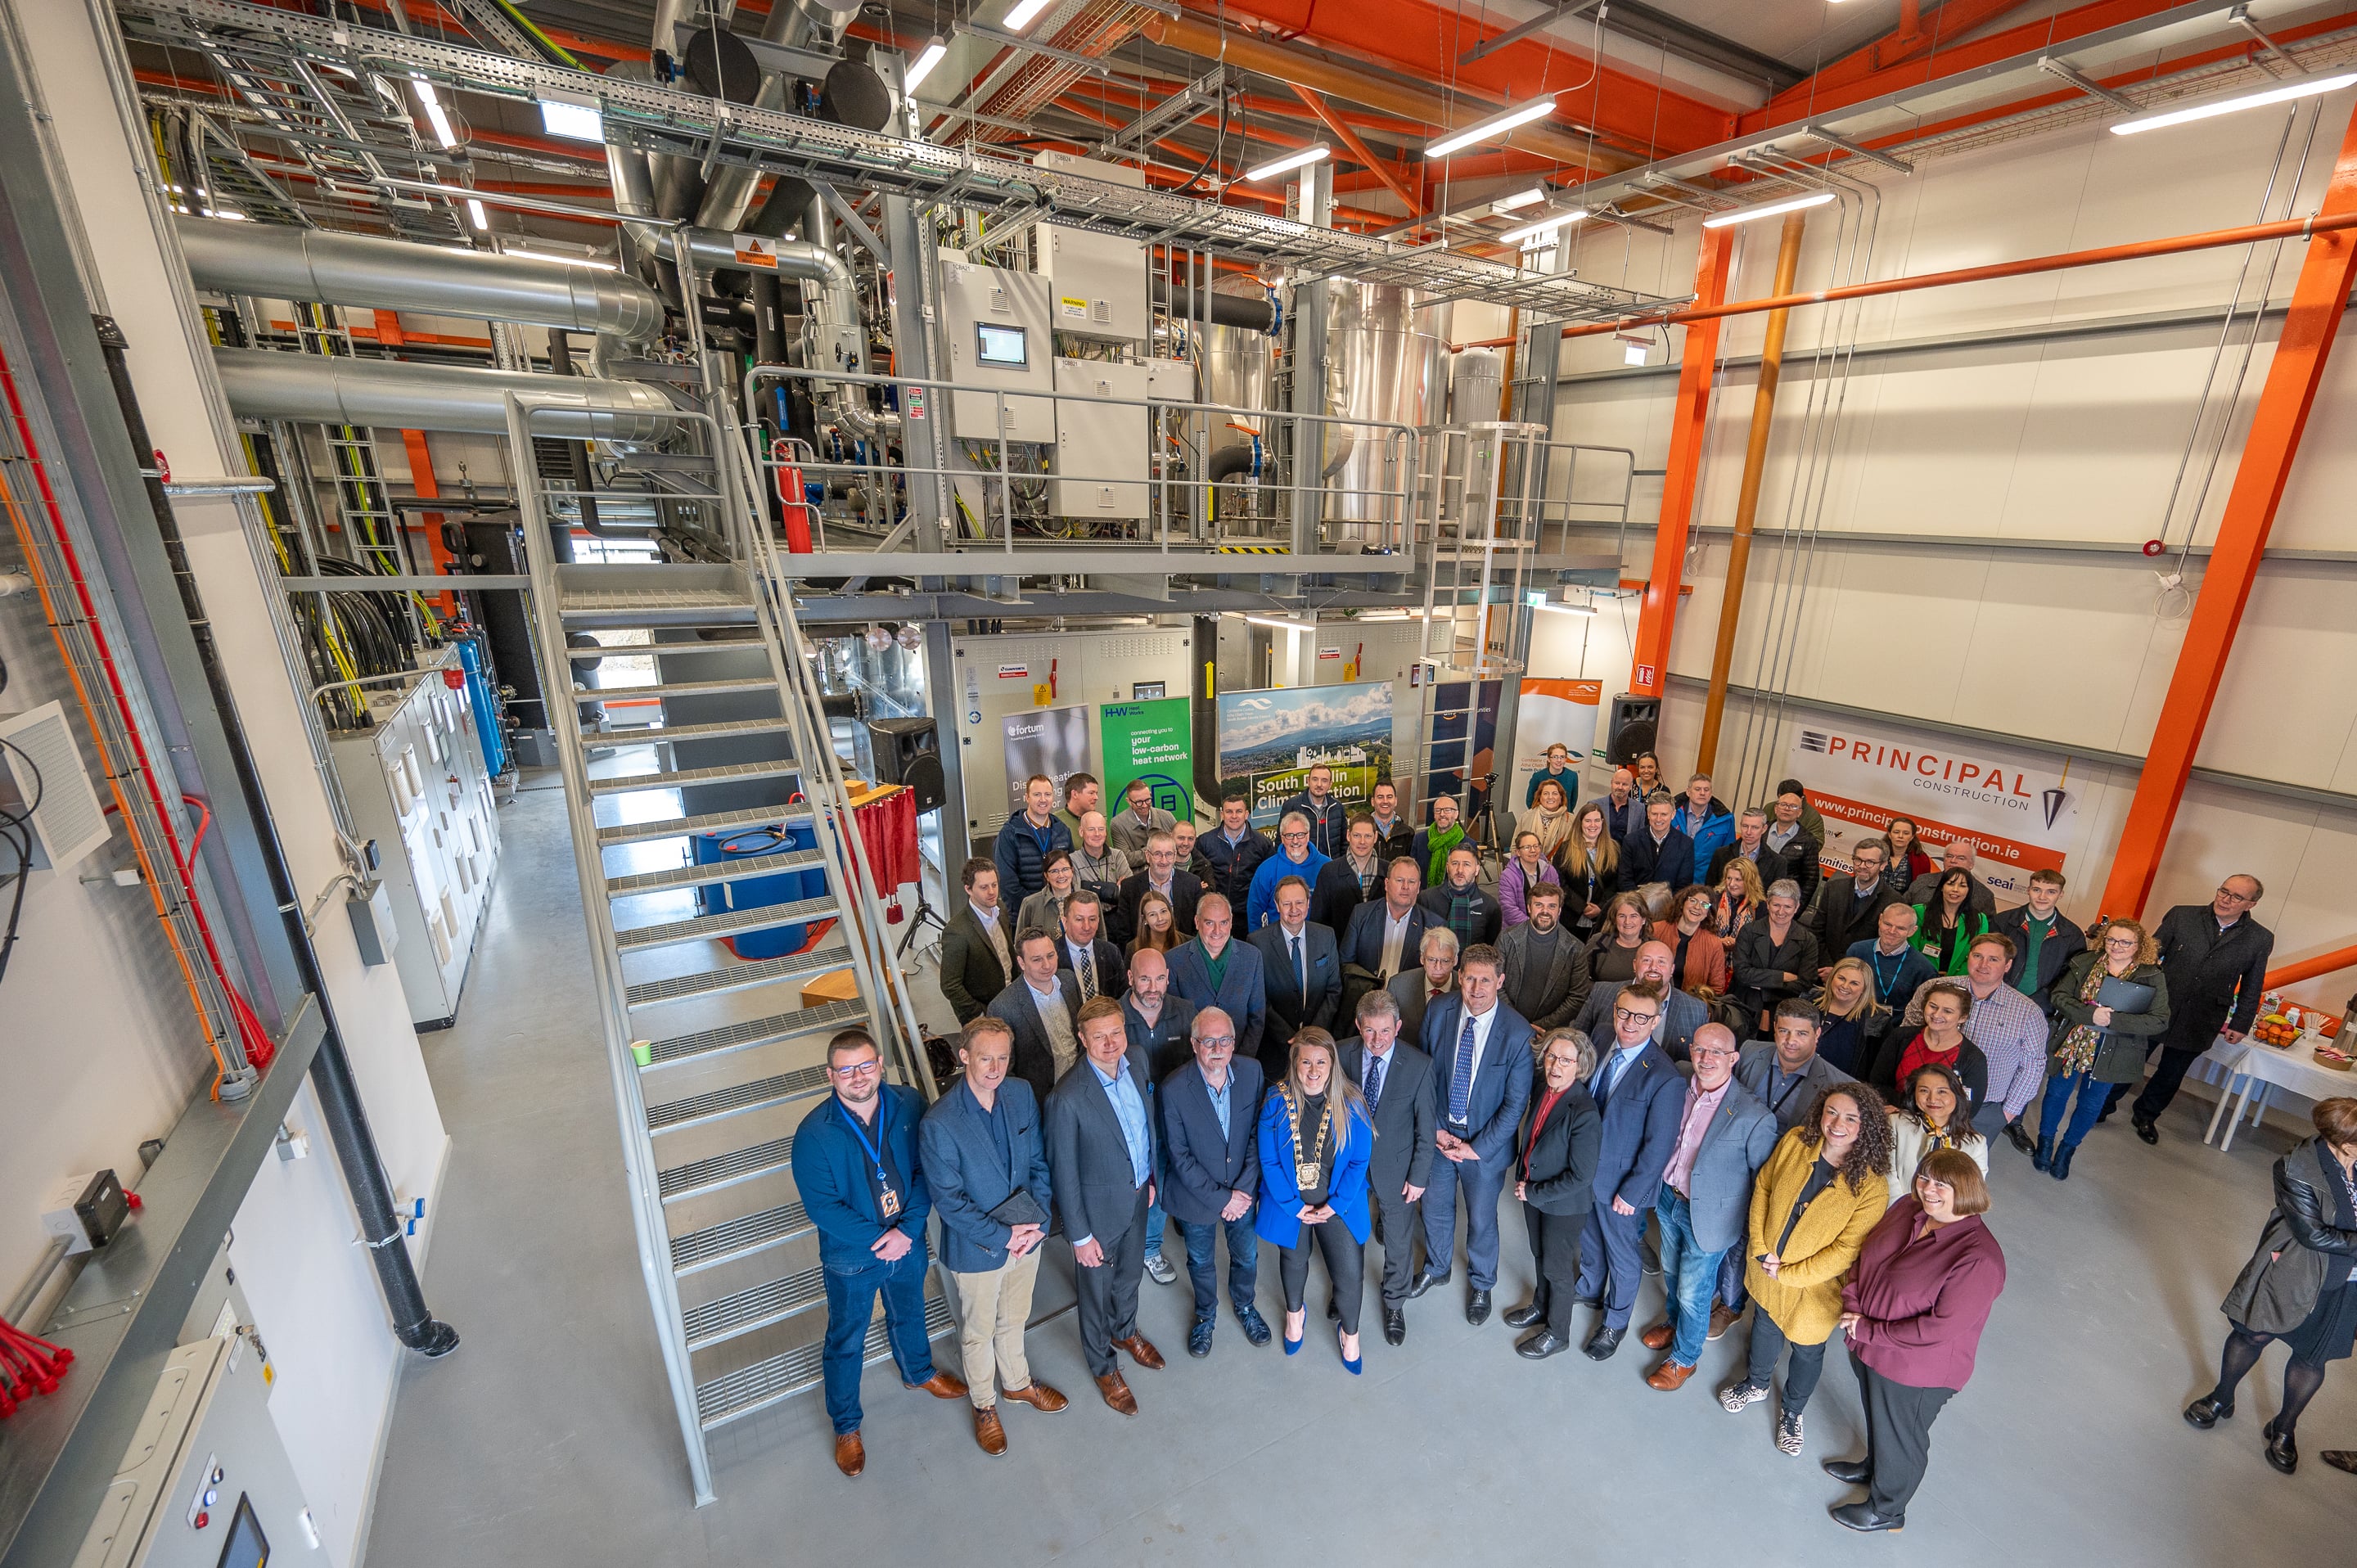 Tallaght District Heating Network And Energy Centre Officially Opened sumamry image